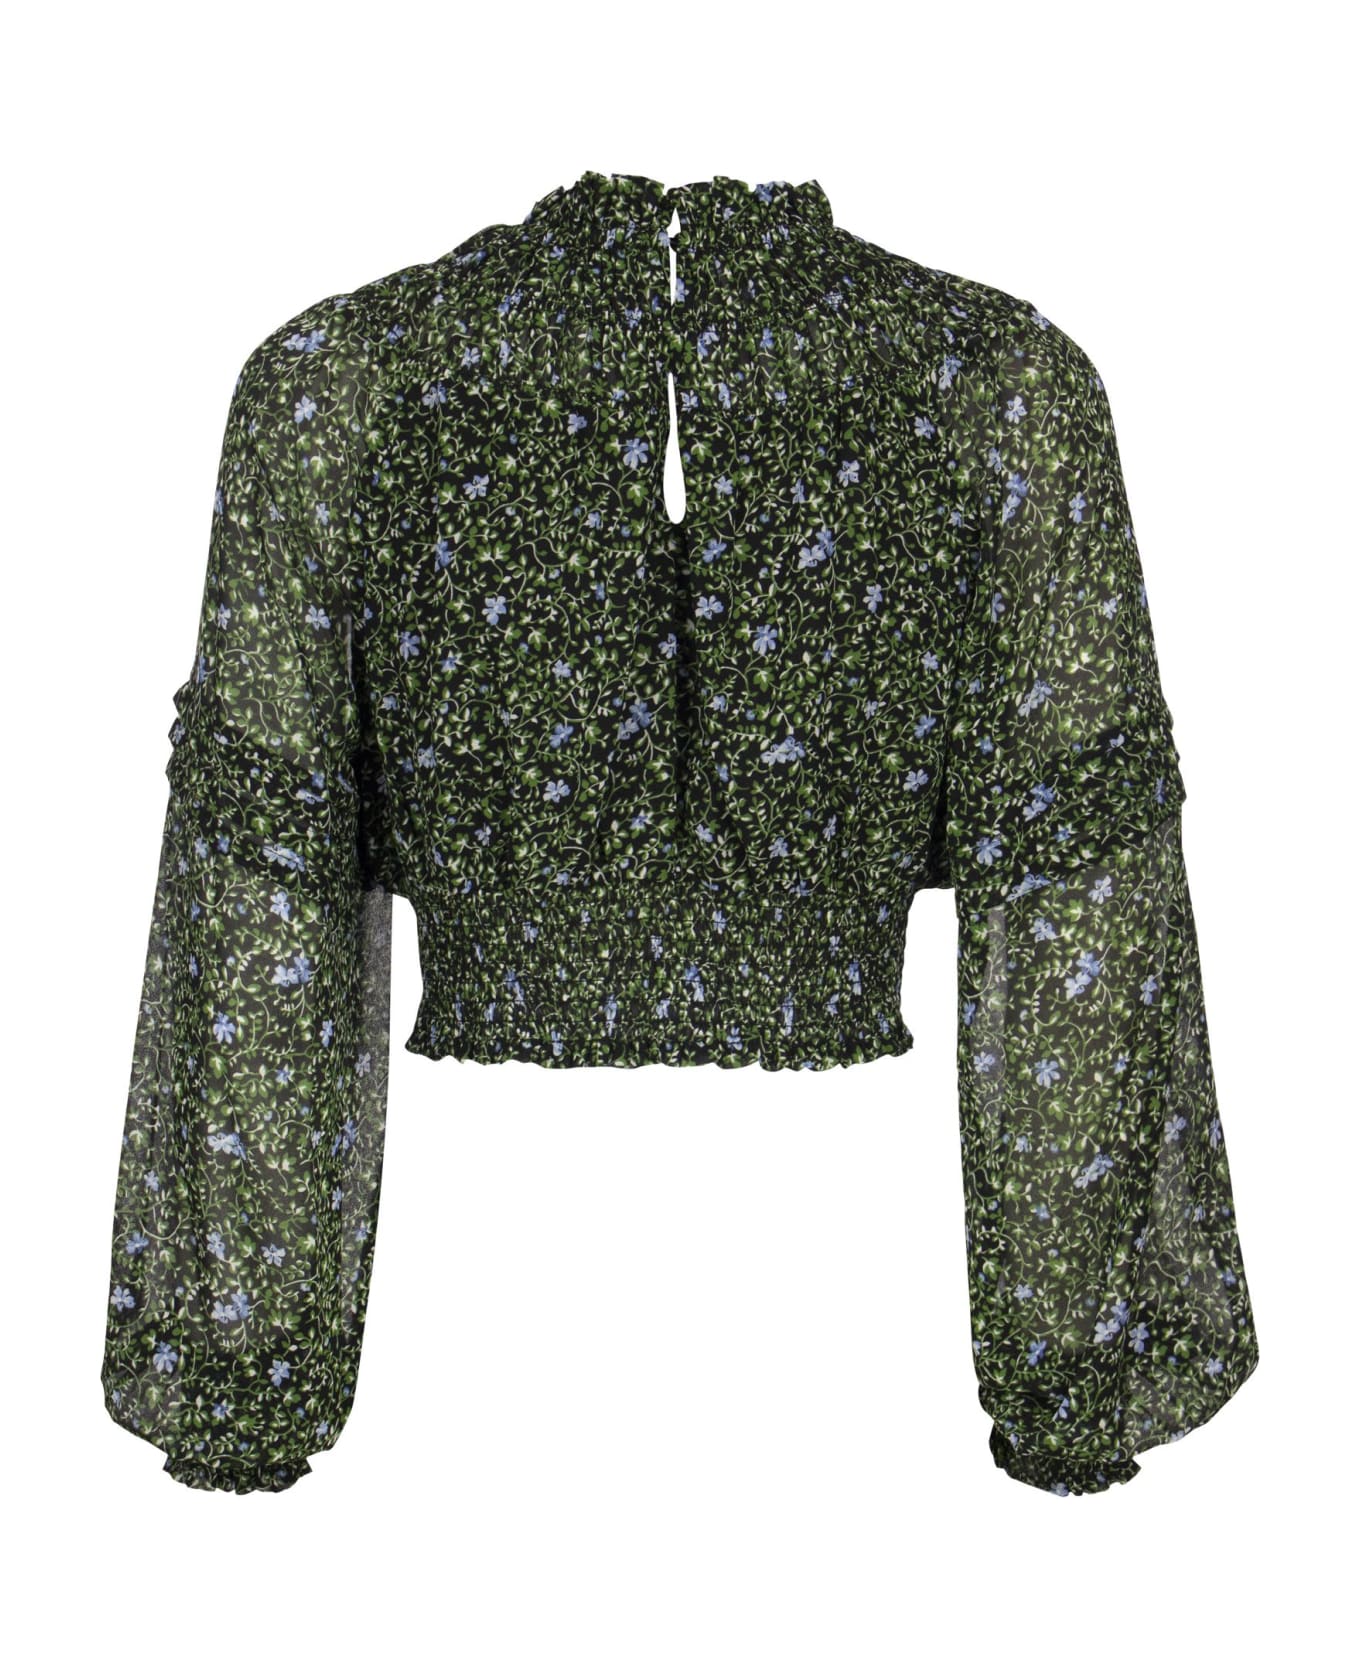 Michael Kors Georgette Blouse With Smock Stitch And Floral Print - Green